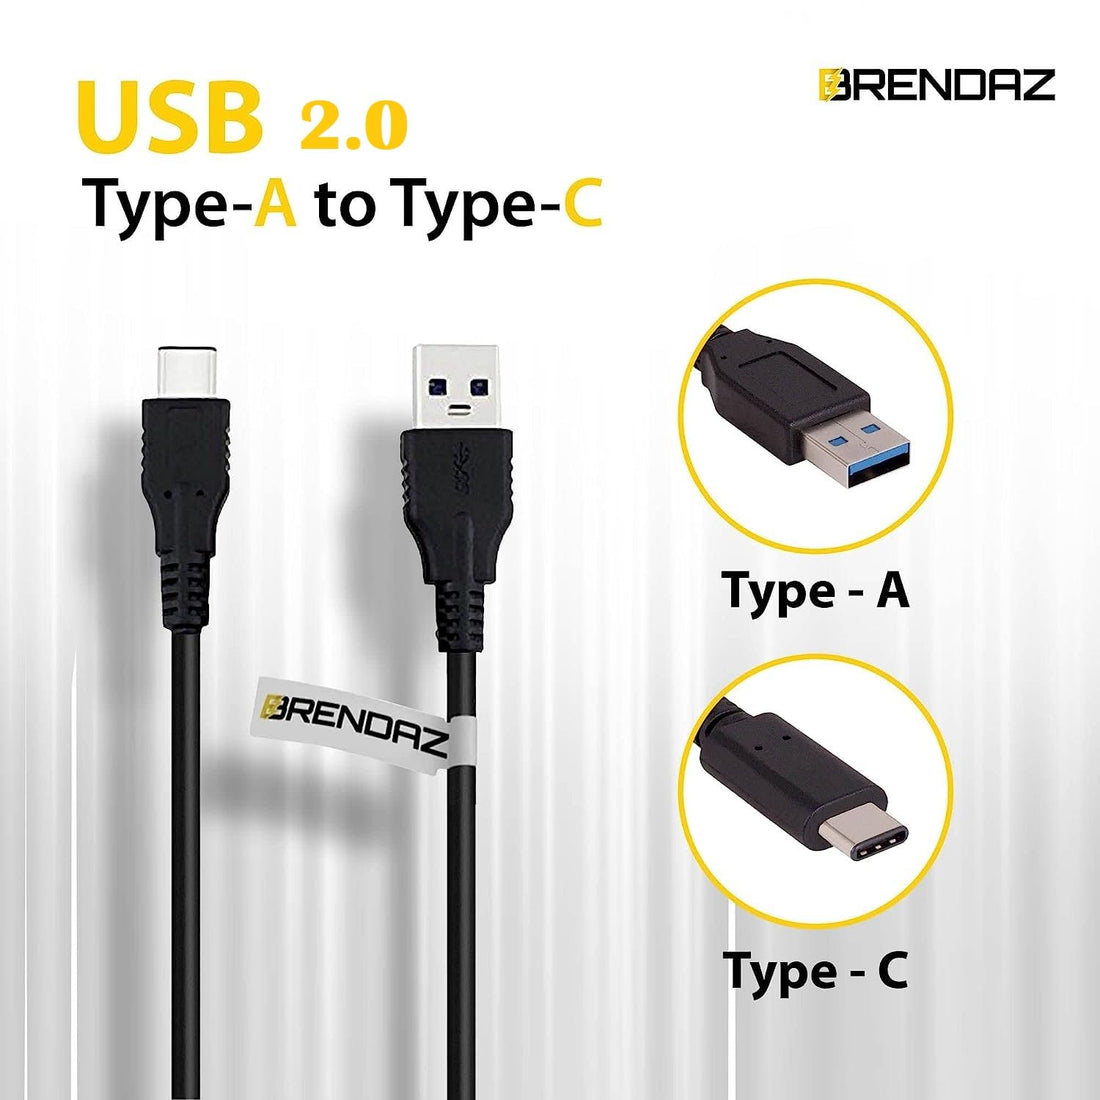 BRENDAZ Type C USB Cable, Replacement USB-C 3.1 Charge & Sync Cable Compatible with RODE VideoMic NTG Shotgun, PodMic USB, NT-USB Mini Microphone and More. (USB Type-C to USB-A)